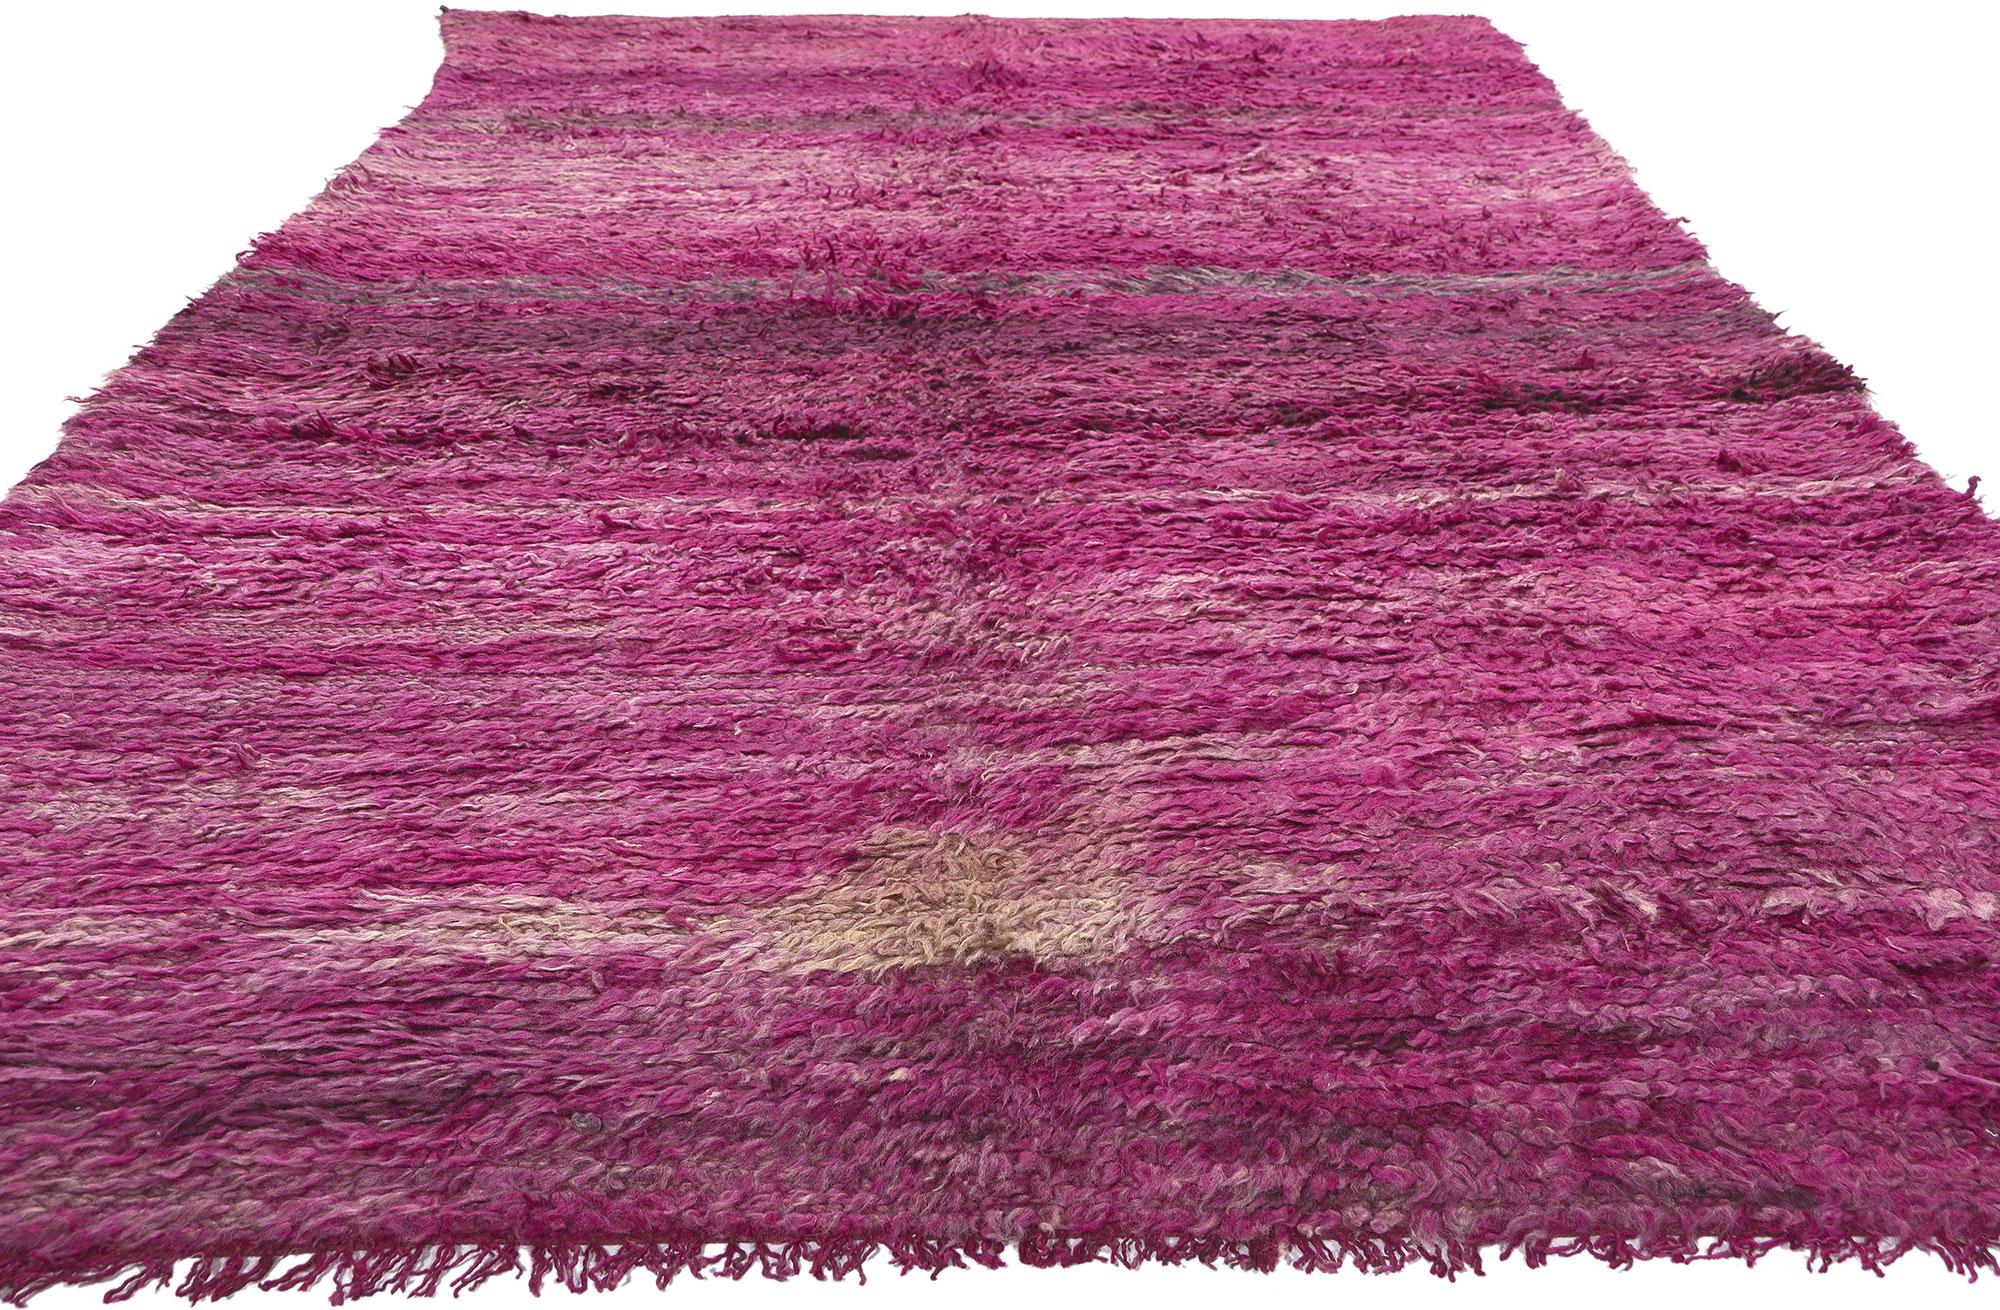 Reversible Vintage Beni MGuild Moroccan Rug, Boho Meets Abstract Expressionism For Sale 1